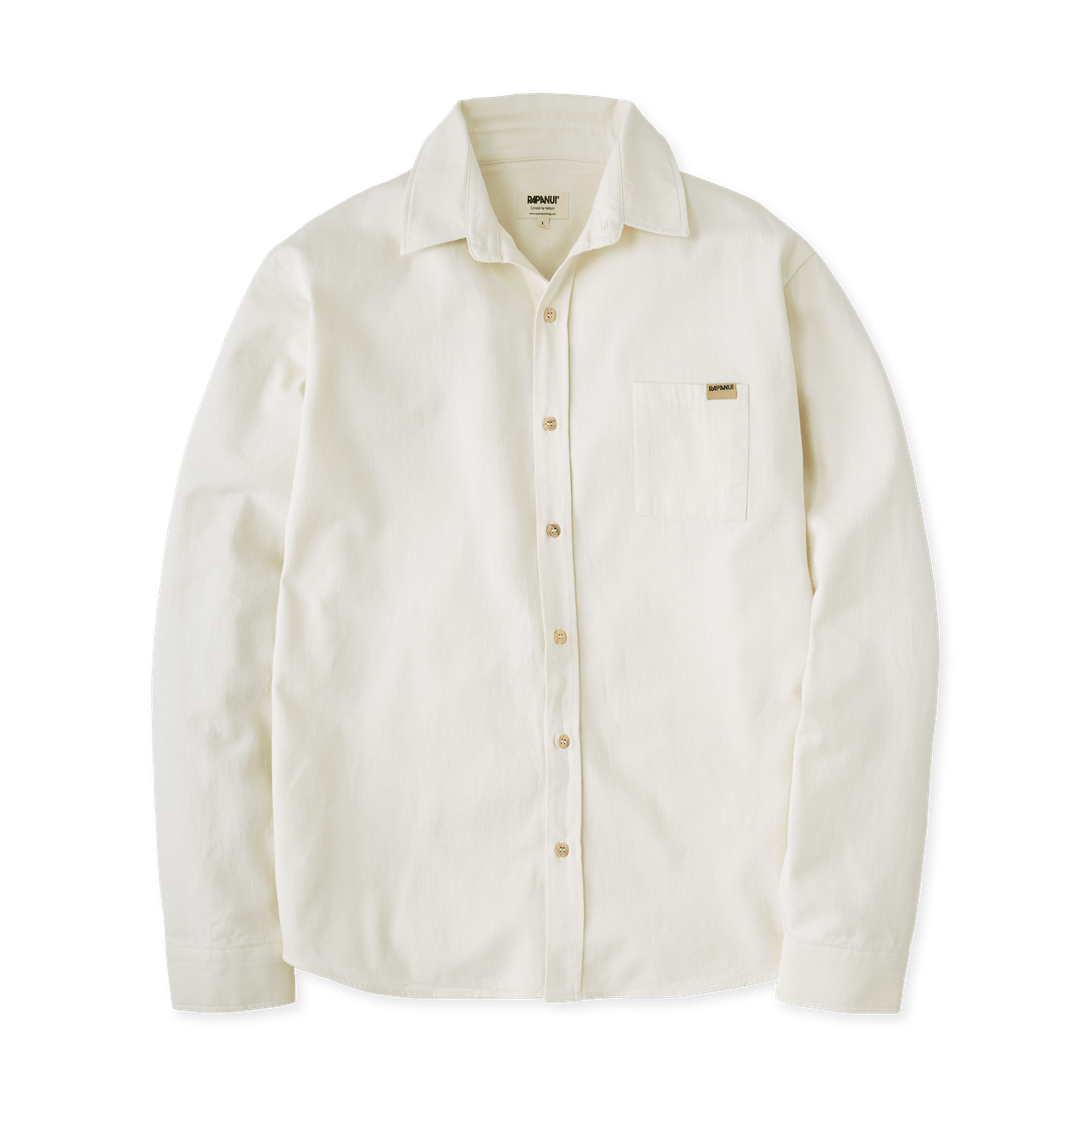 Men's Colwell Twill Shirt - Shirts